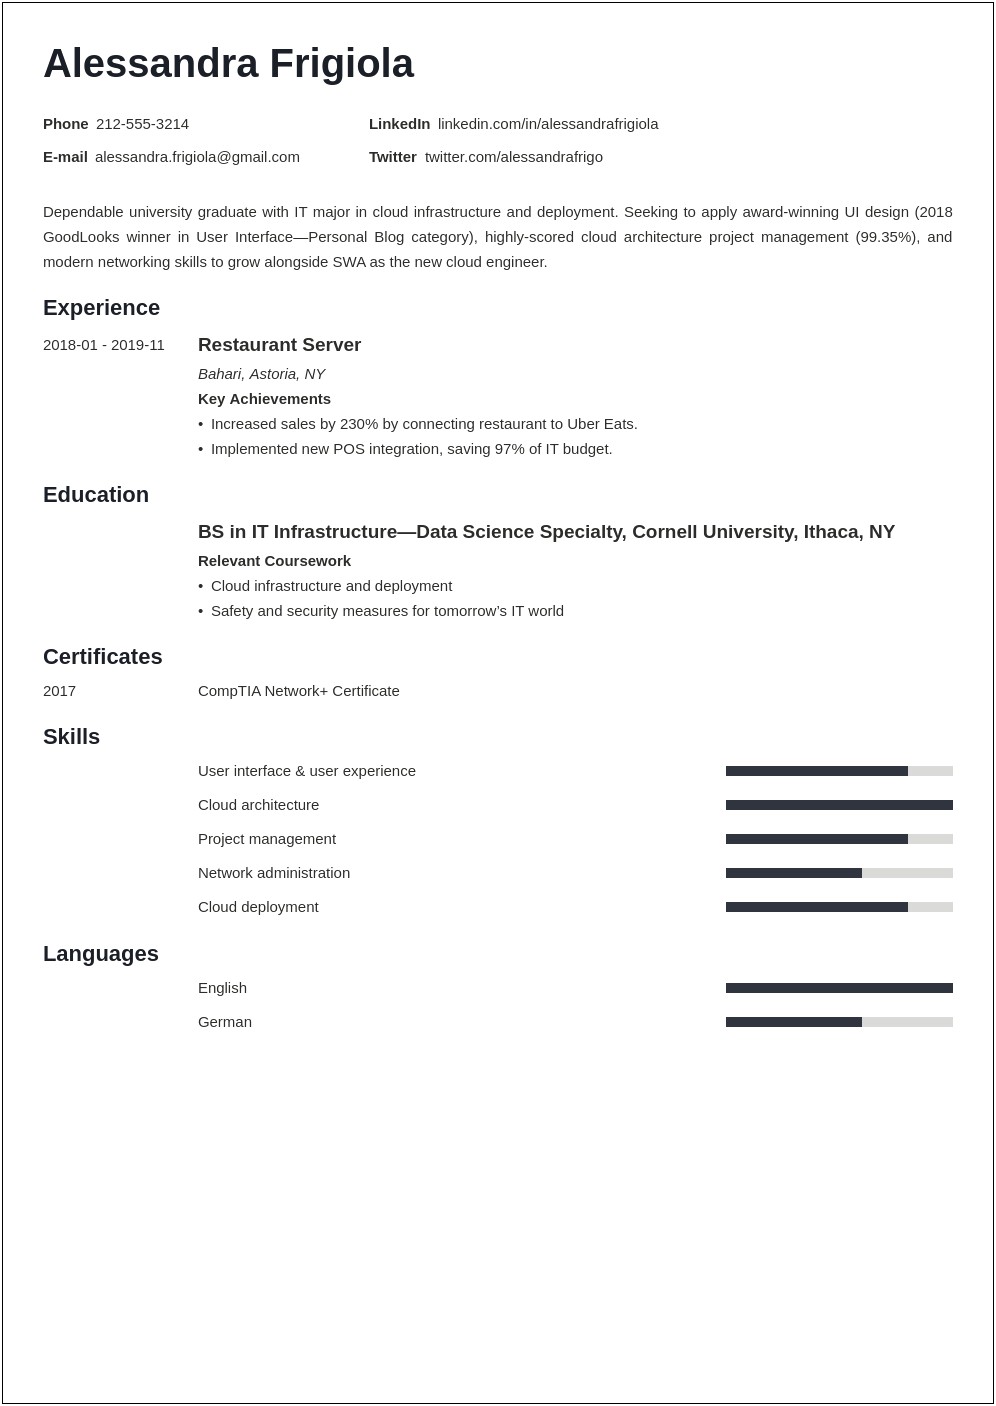 Entry Level Accounting Resume Objective Statement